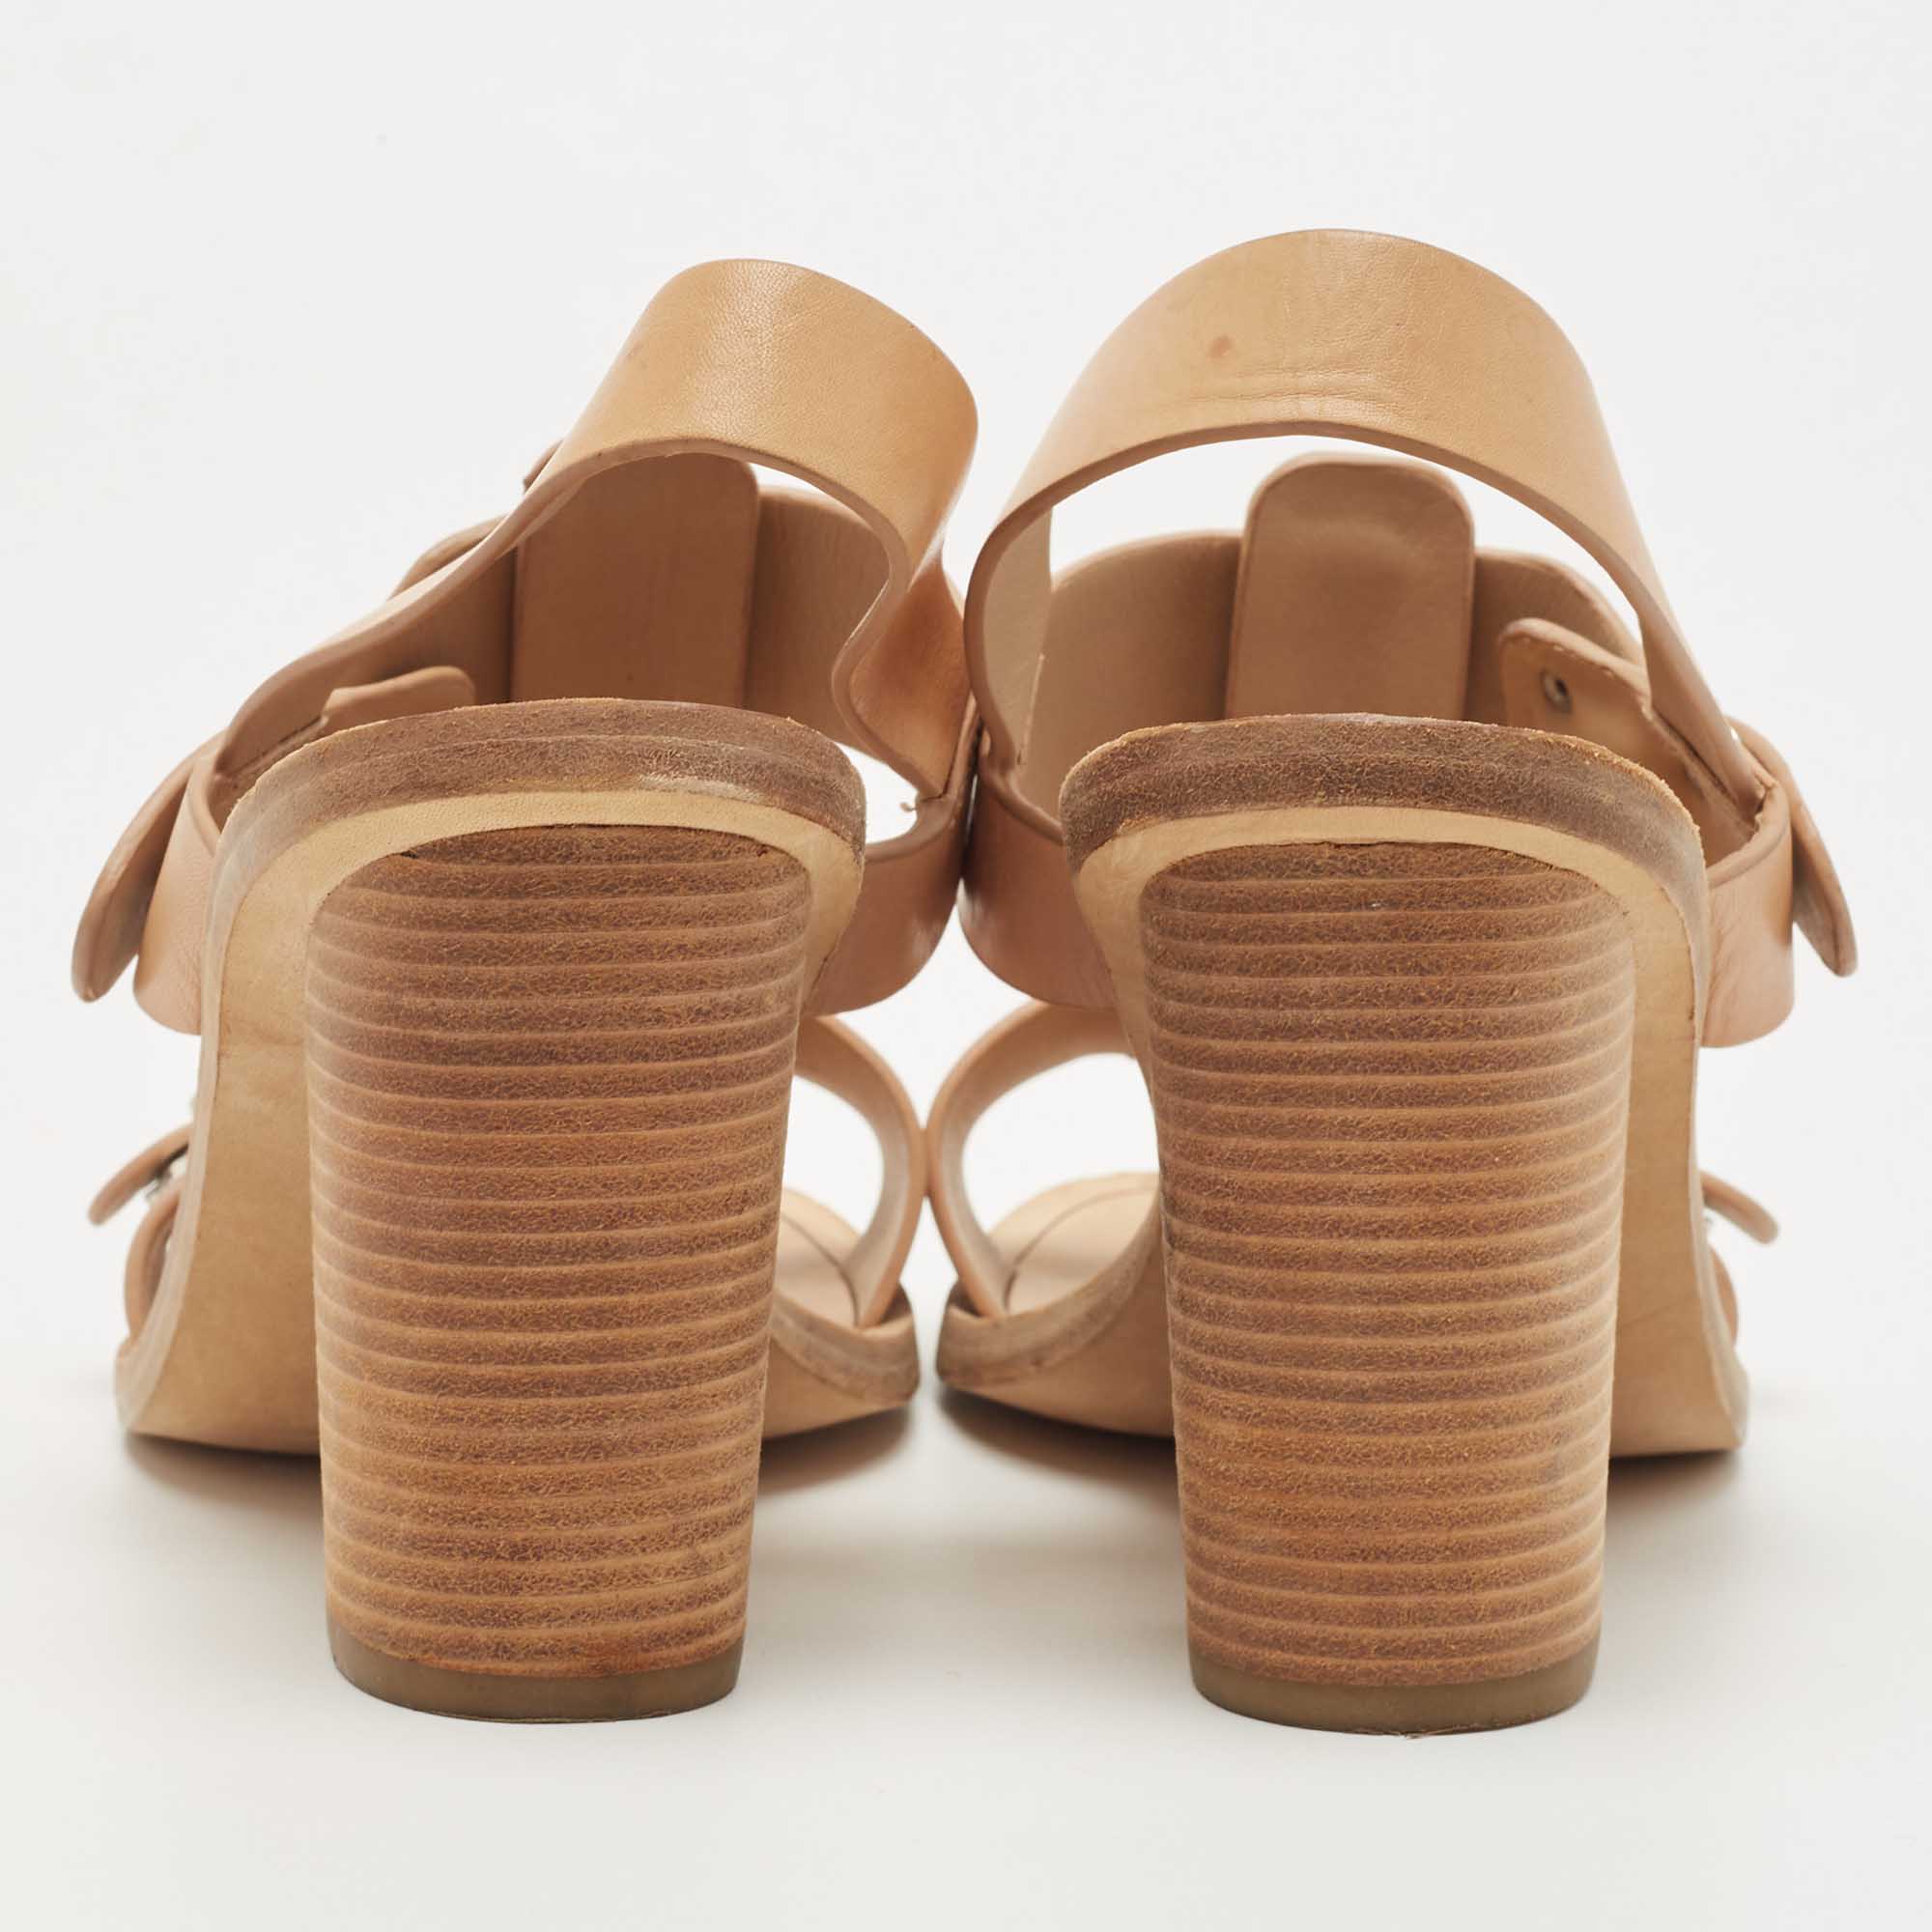 Marc By Marc Jacobs Beige Leather Strappy Sandals Size 37